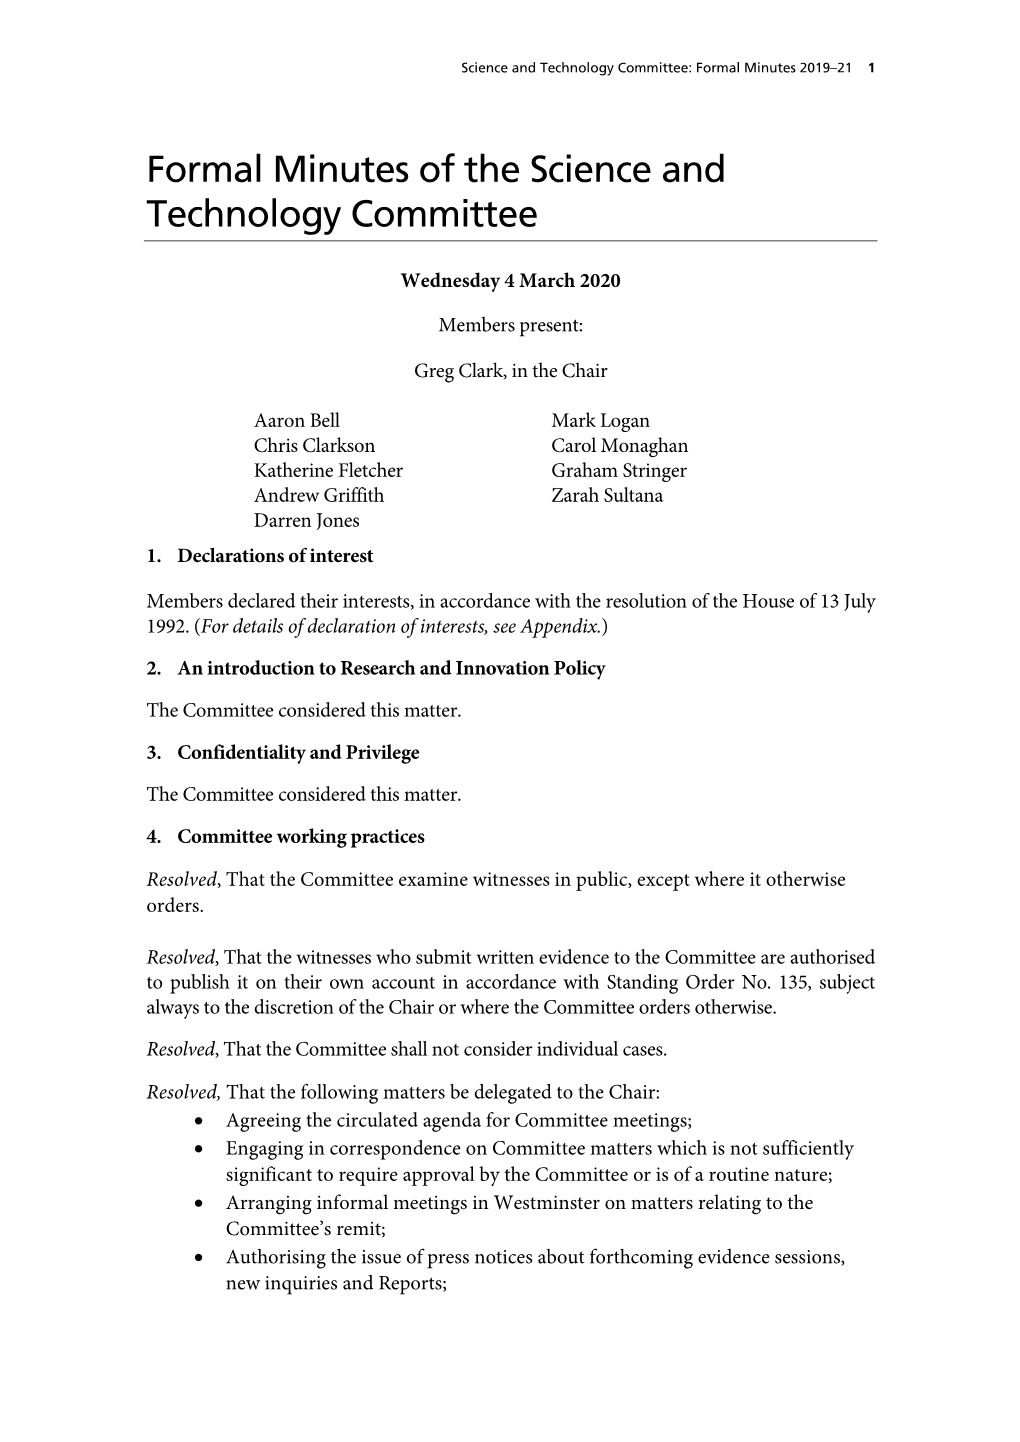 Formal Minutes of the Science and Technology Committee